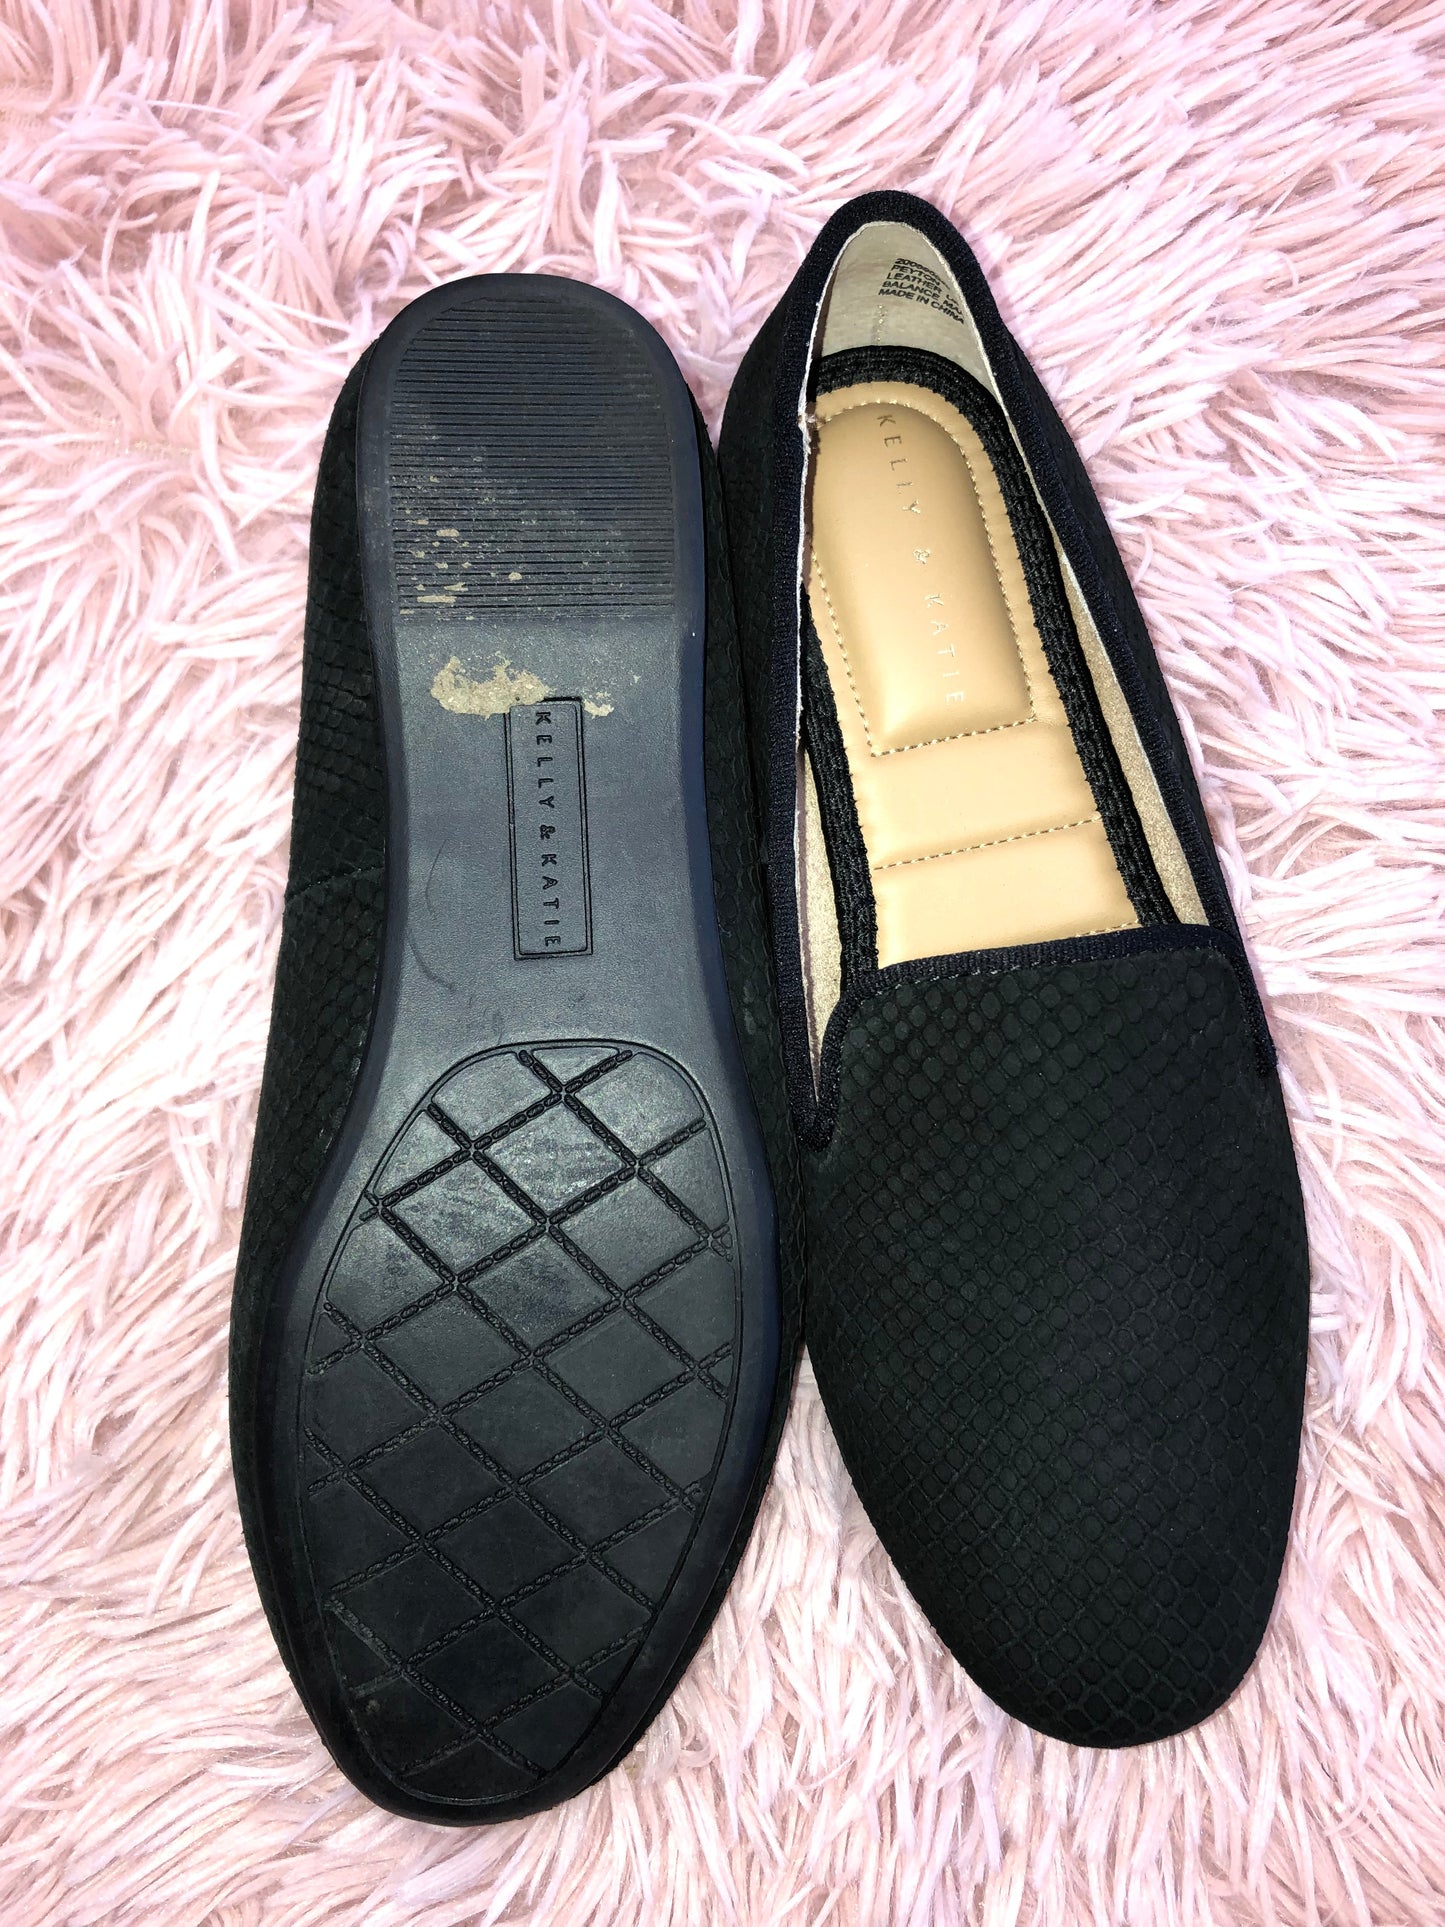 Black Shoes Flats Mule & Slide Kelly And Katie, Size 6.5